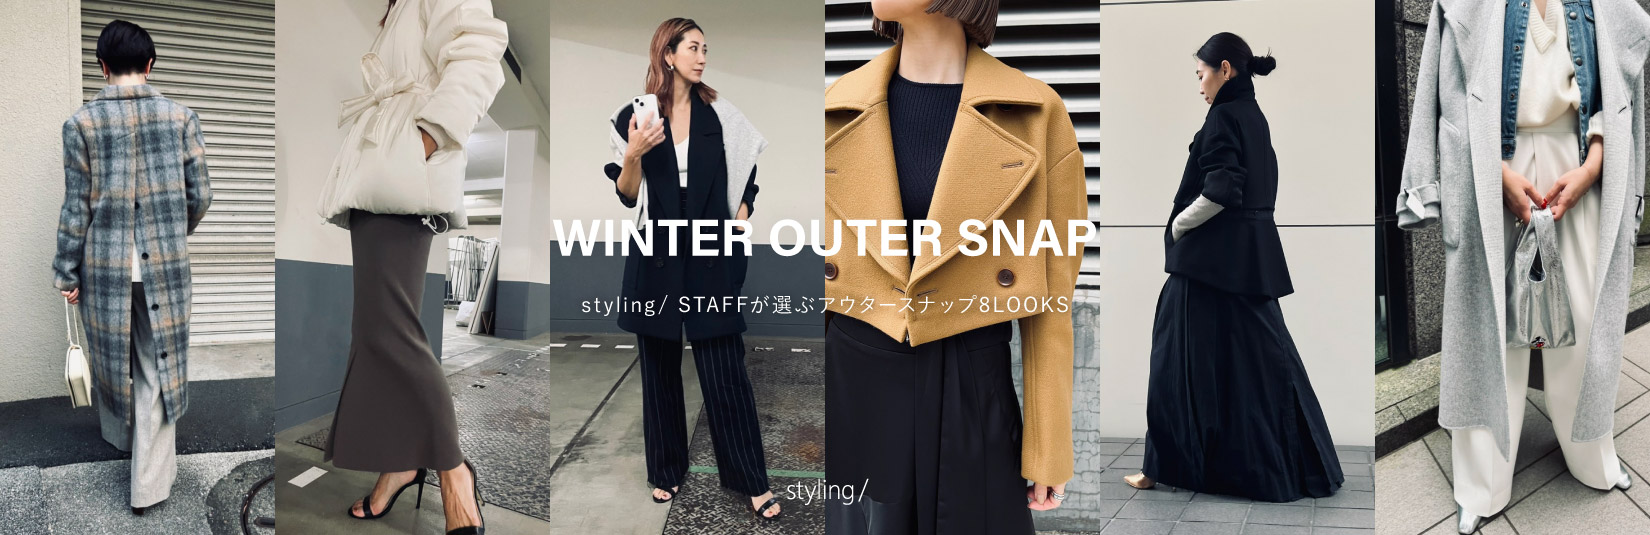 WINTER OUTER SNAP